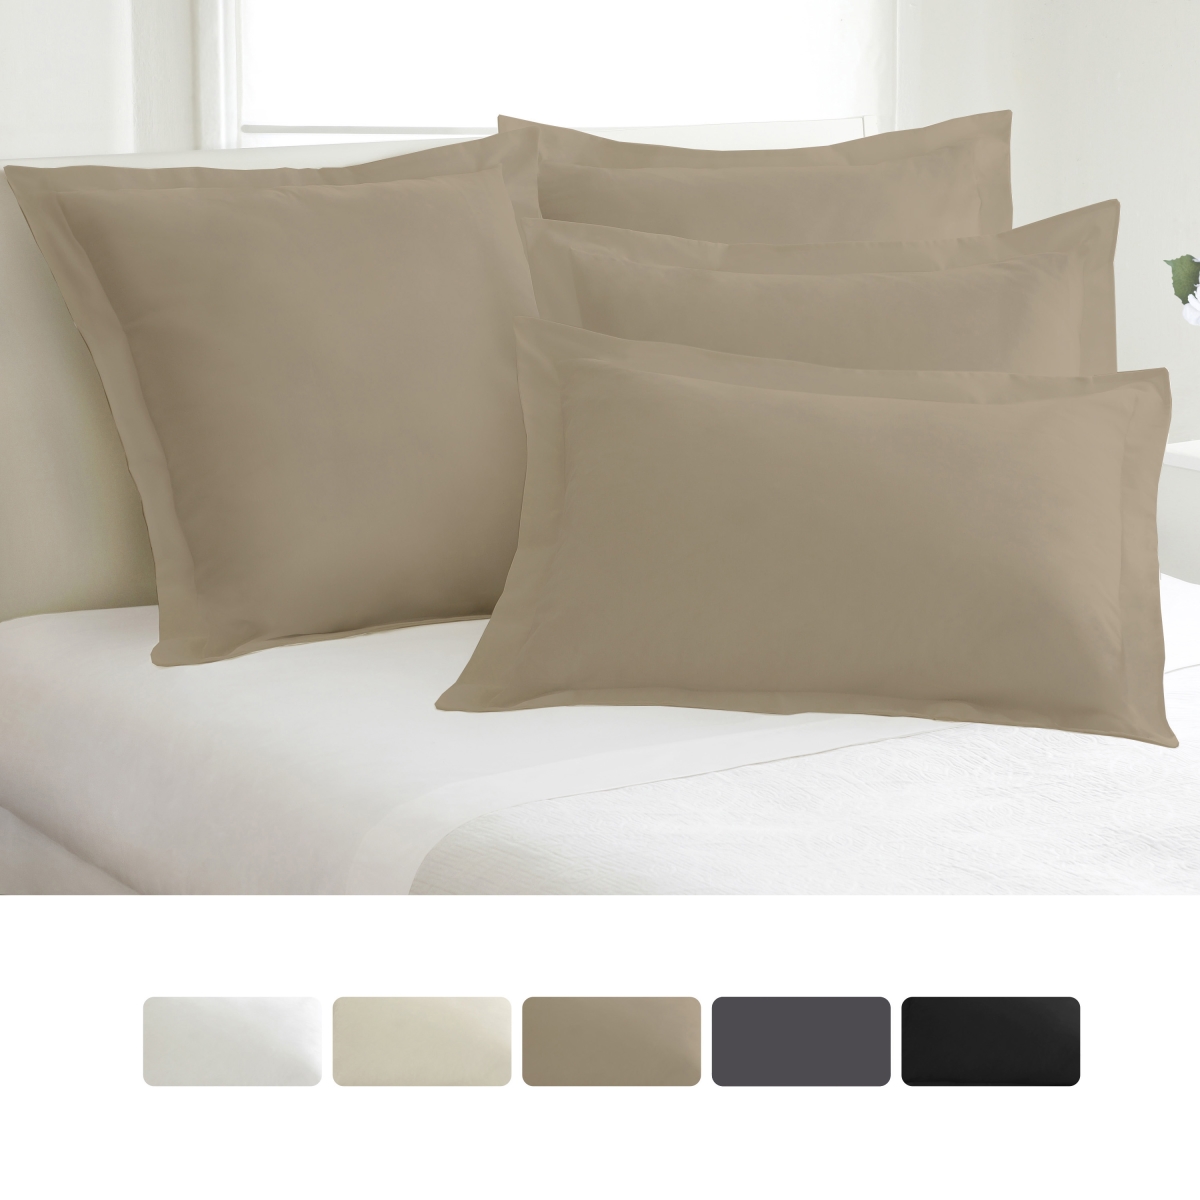 Picture of Todays Home TOH24902MOCH07 Levinsohn Basic Cotton Rich Tailored Sham with 2 in. Flange  Mocha - Standard - Pack of 2